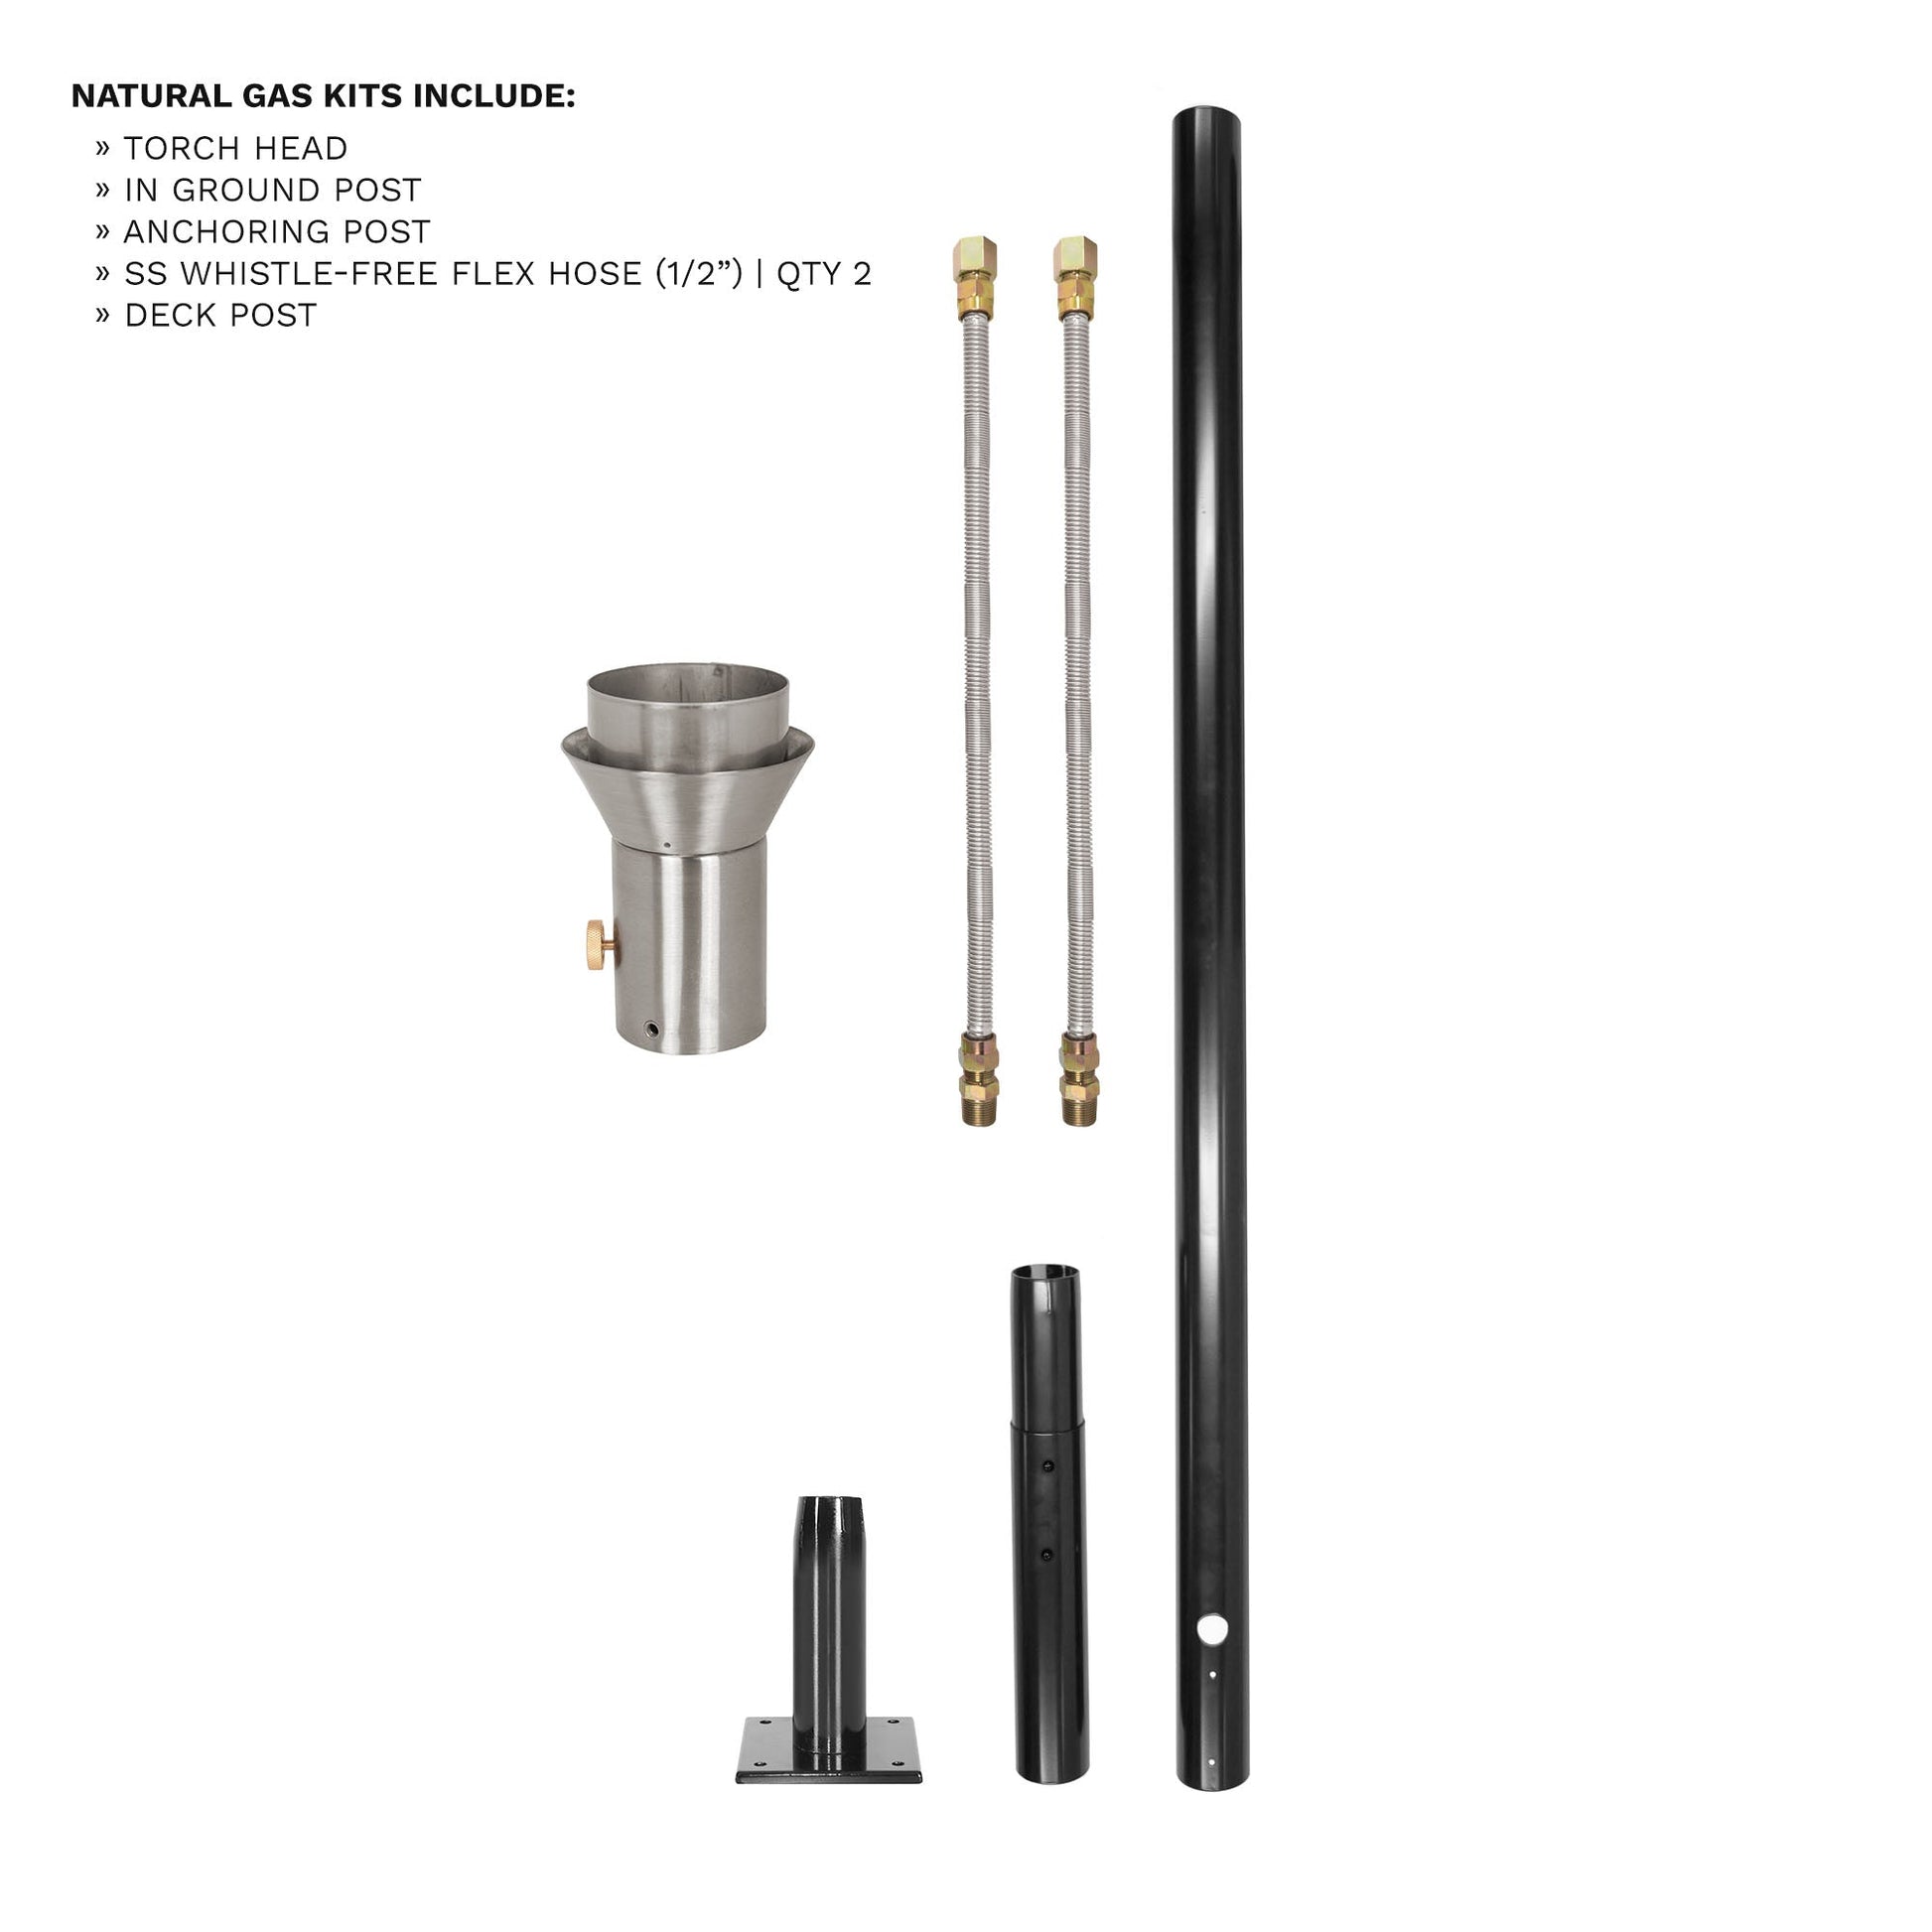 Roman Original TOP Torch & Post Complete Kit - Stainless Steel - Natural Gas-Novel Home